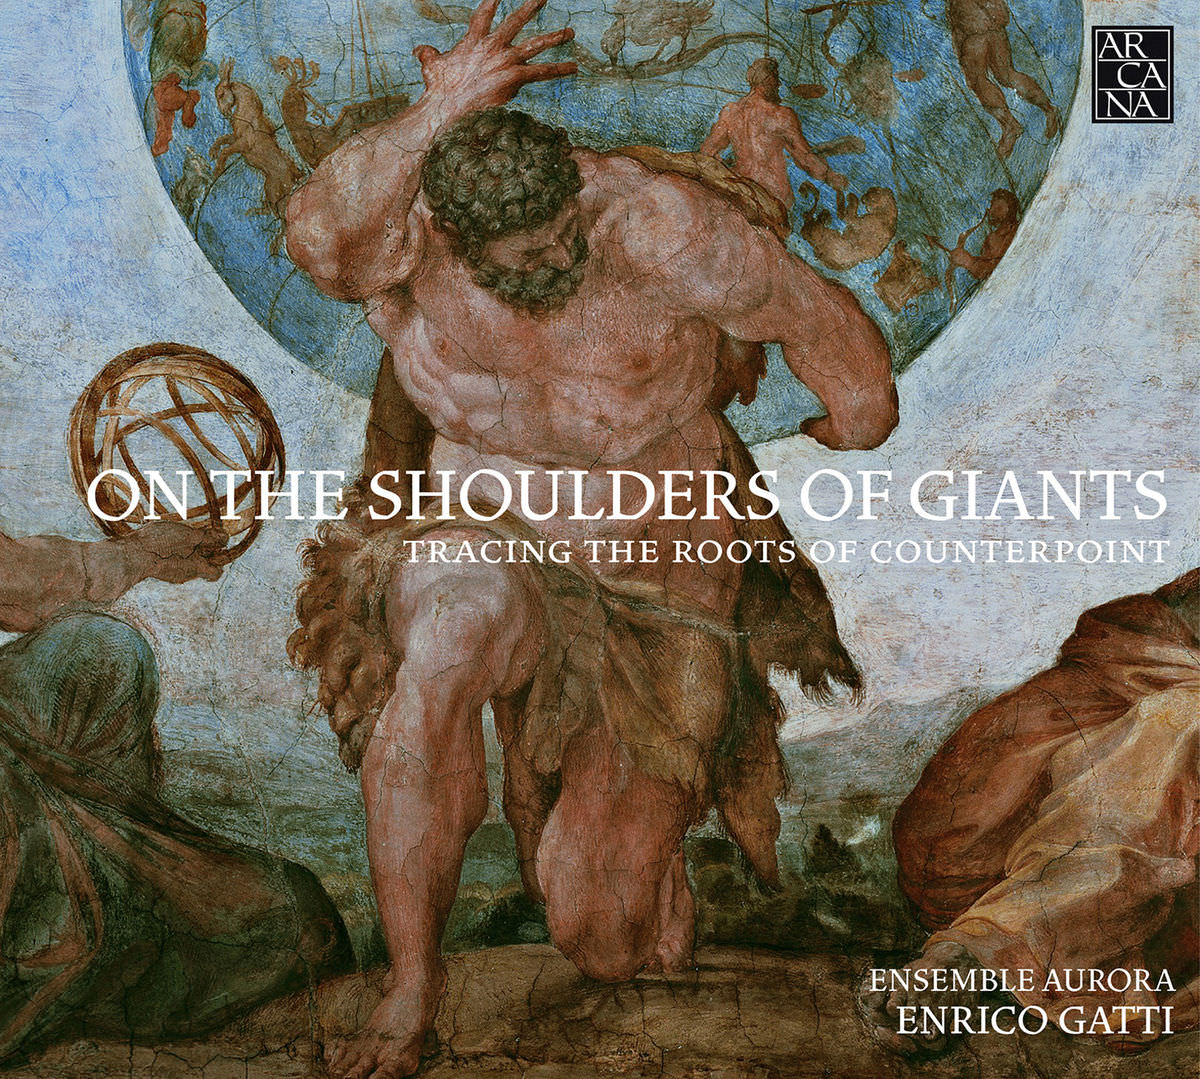 Ensemble Aurora - On the Shoulders of Giants: Tracing the Roots of Counterpoint (2014) [FLAC 24bit/44,1kHz]